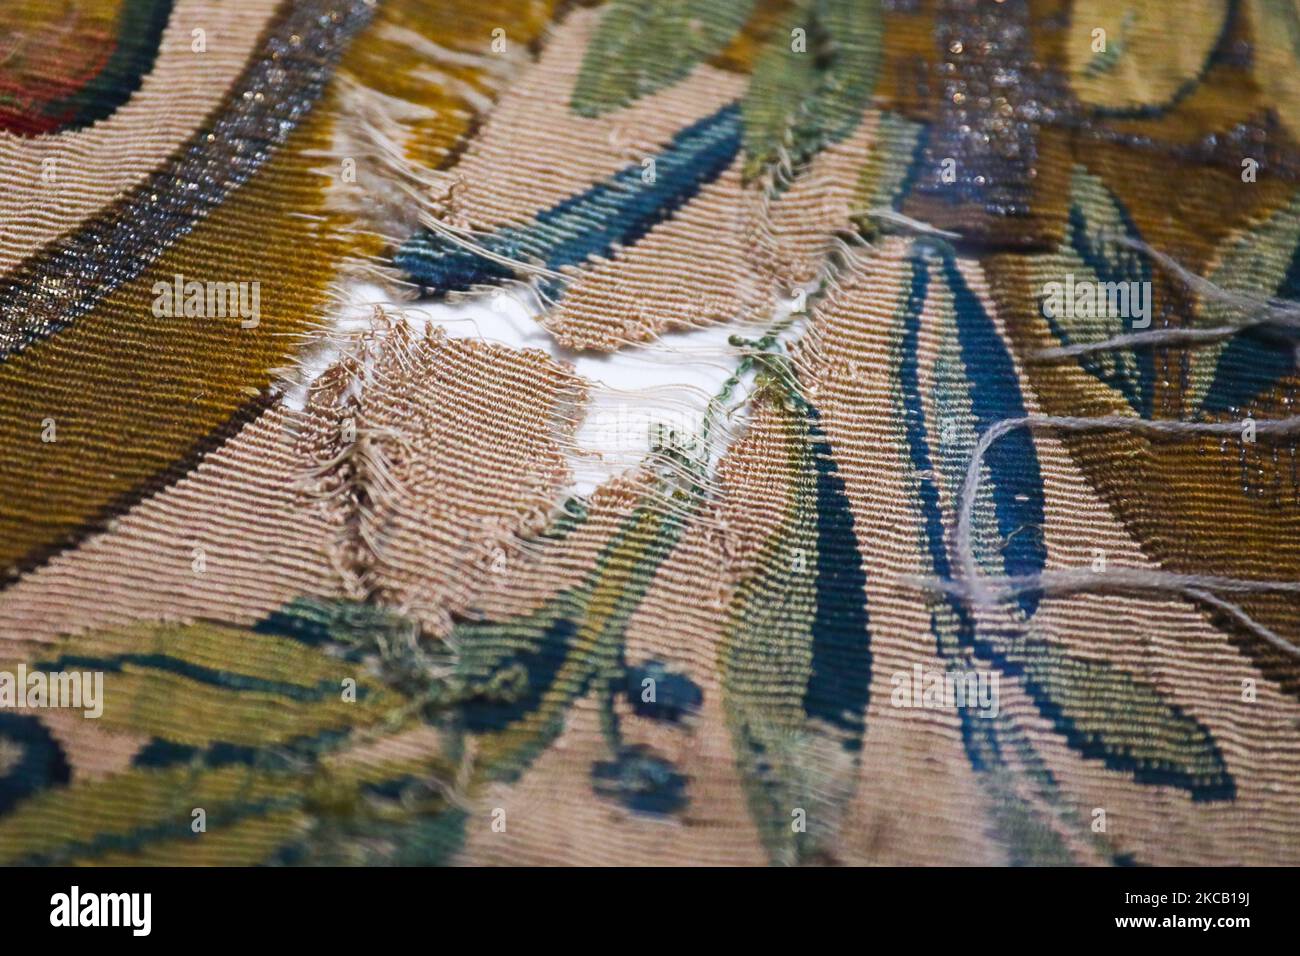 A partially damaged tapestry is shown during the major exhibition 'All the King’s Tapestries: Homecomings 2021-1961-1921' at the Wawel Royal Castle in Krakow, Poland on March 16, 2021. For the first time all 137 of the royal tapestries from the collection of King Sigismund II Augustus that are preserved in Poland are now open for viewers for six months.Tapestries from the leading Brussels’ workshops in the mid-1500s, range from monumental figurative textiles with biblical scenes, through verdures depicting animals and armorial tapestries, to small tapestries meant to cover furniture. (Photo by Stock Photo